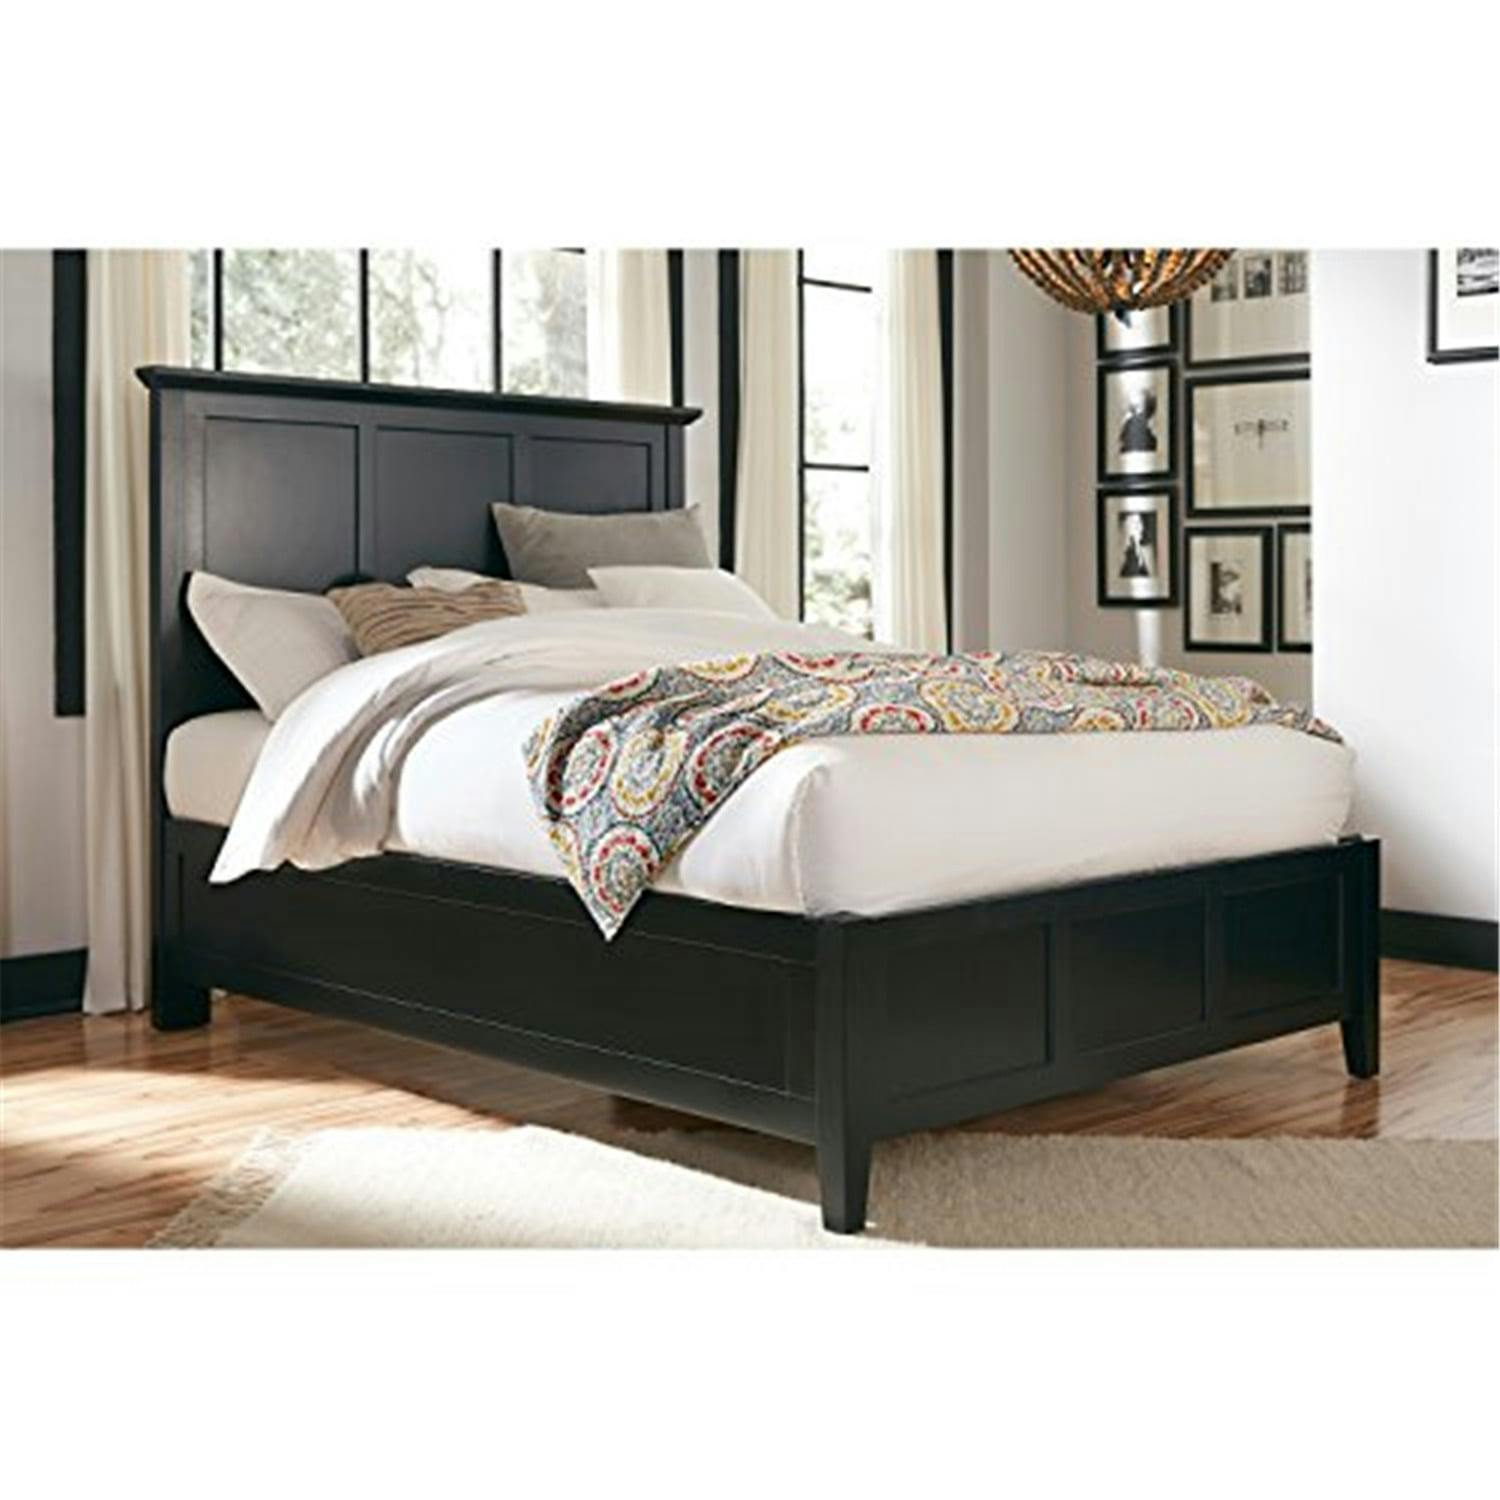 Paragon Traditional Full Bed with Storage Drawers in Black Mahogany